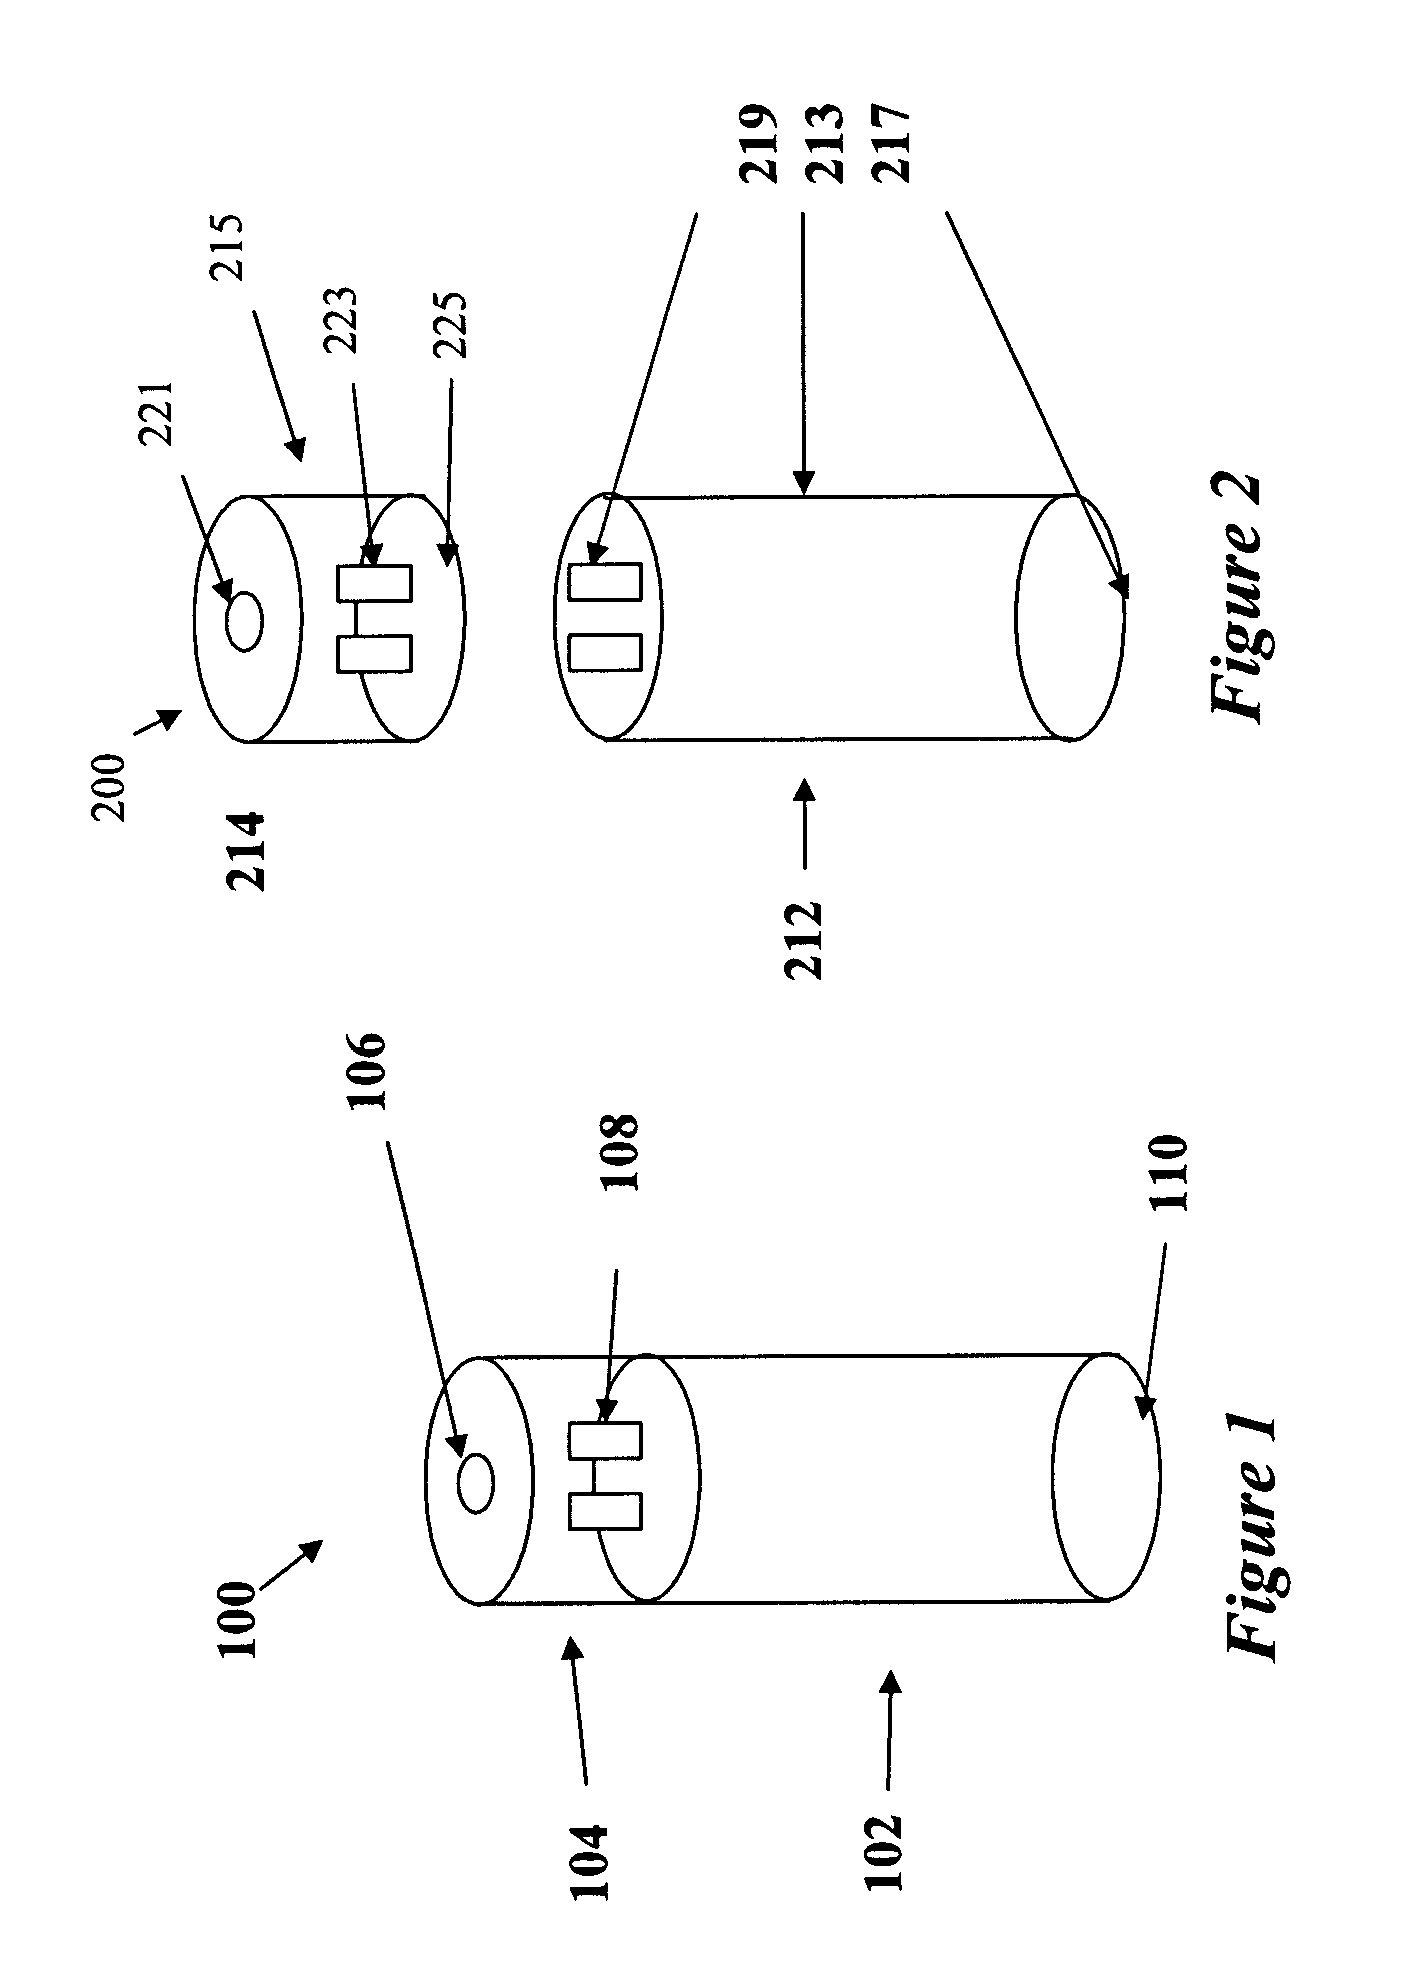 Battery power delivery module